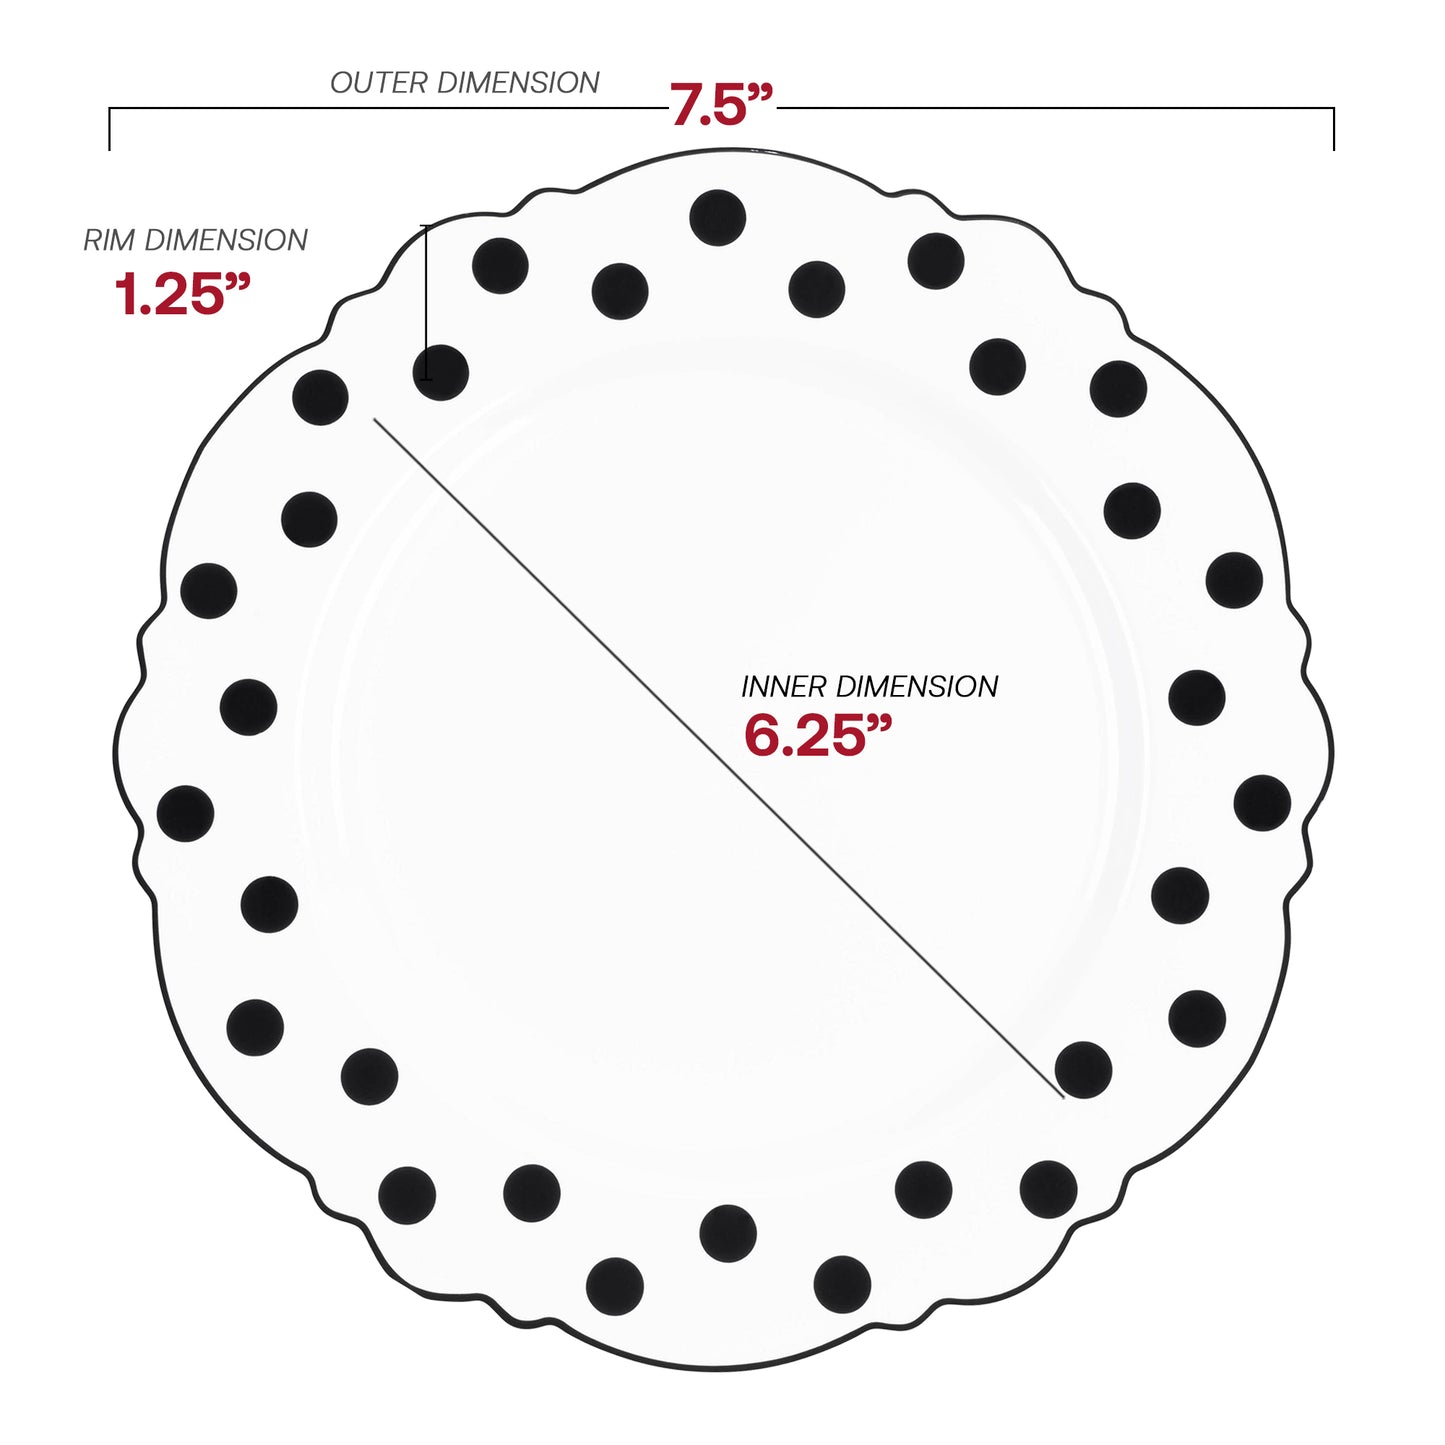 White with Black Dots Round Blossom Disposable Plastic Salad Plates (7.5") Dimension | The Kaya Collection